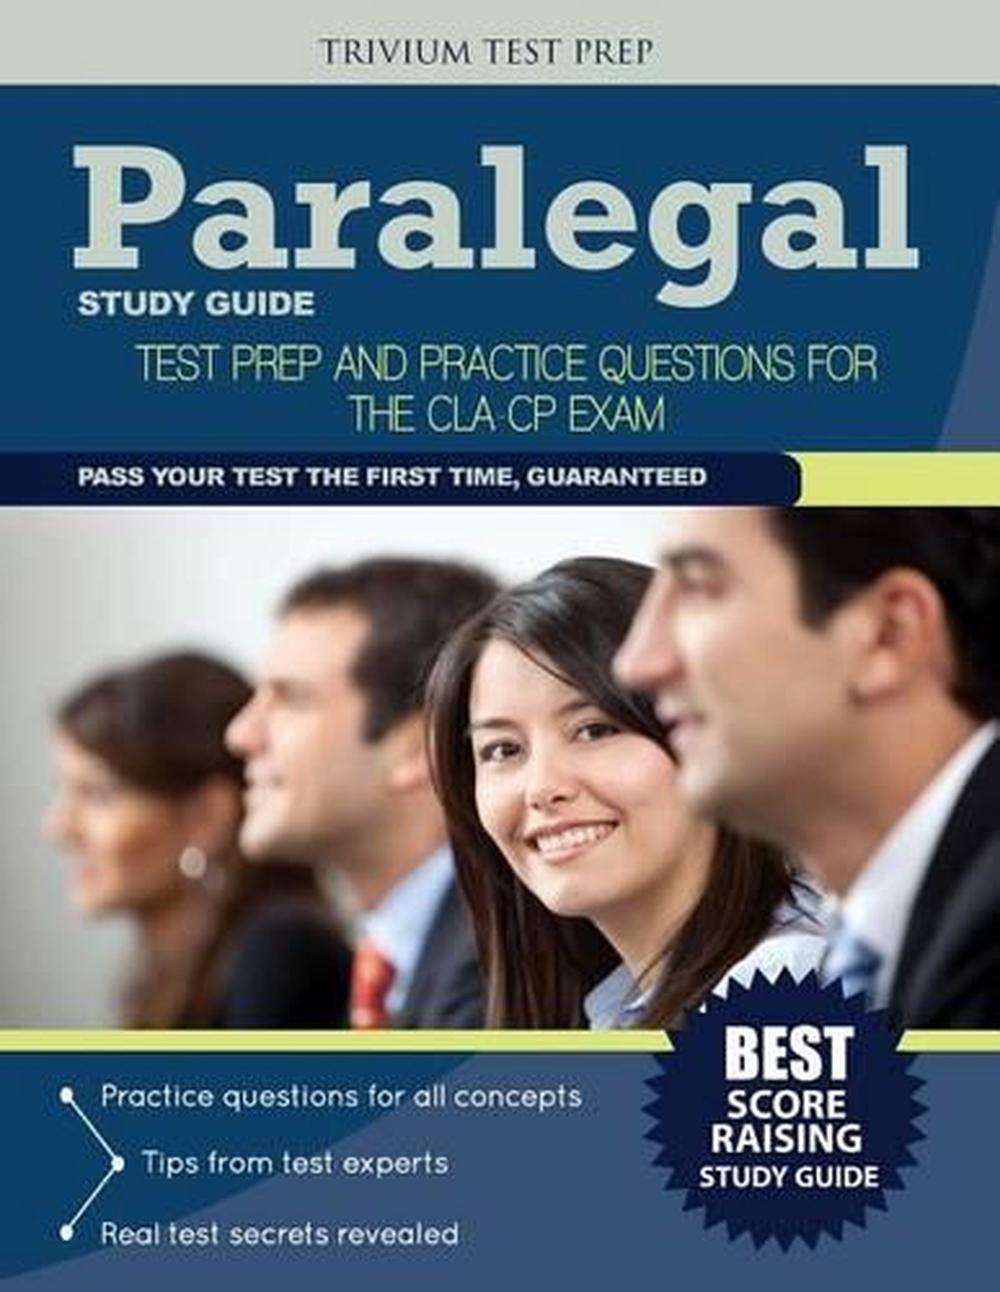 paralegal-study-guide-test-prep-and-practice-questions-for-the-cla-cp-exam-by-p-9781940978857